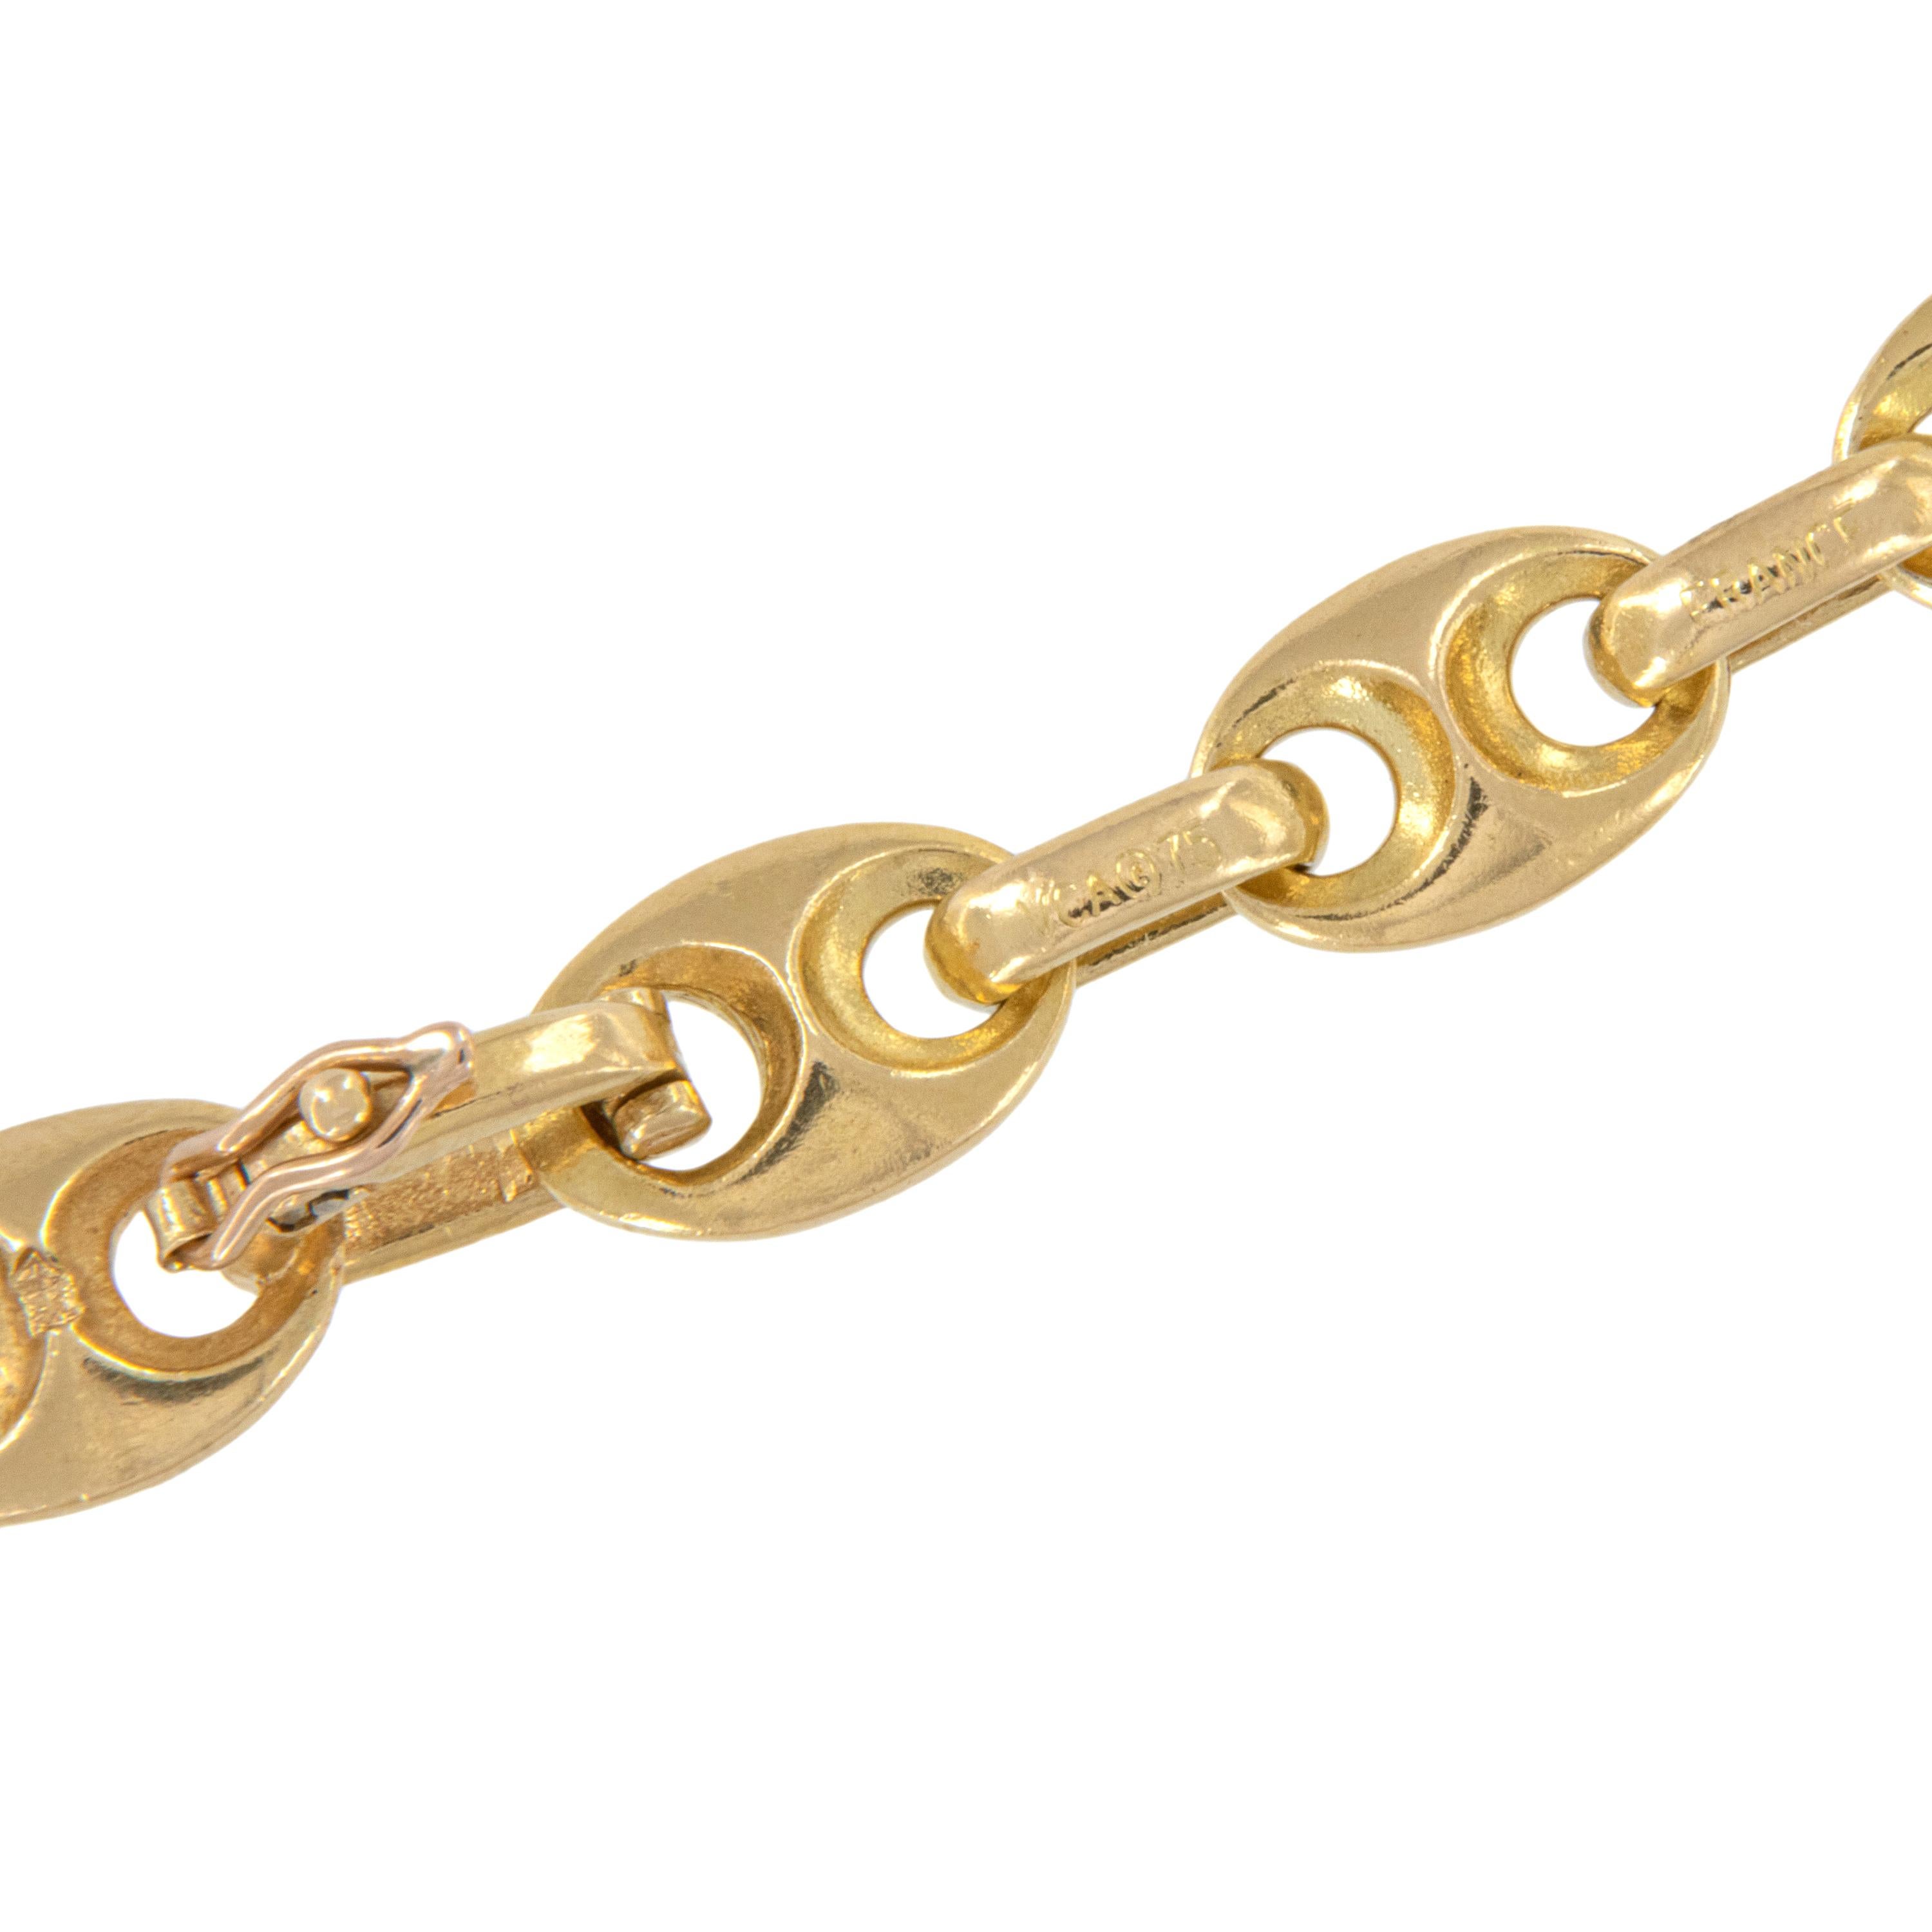 Contemporary Rarely seen Van Cleef and Arpels 18 Karat Yellow Gold Gucci Anchor Chain 